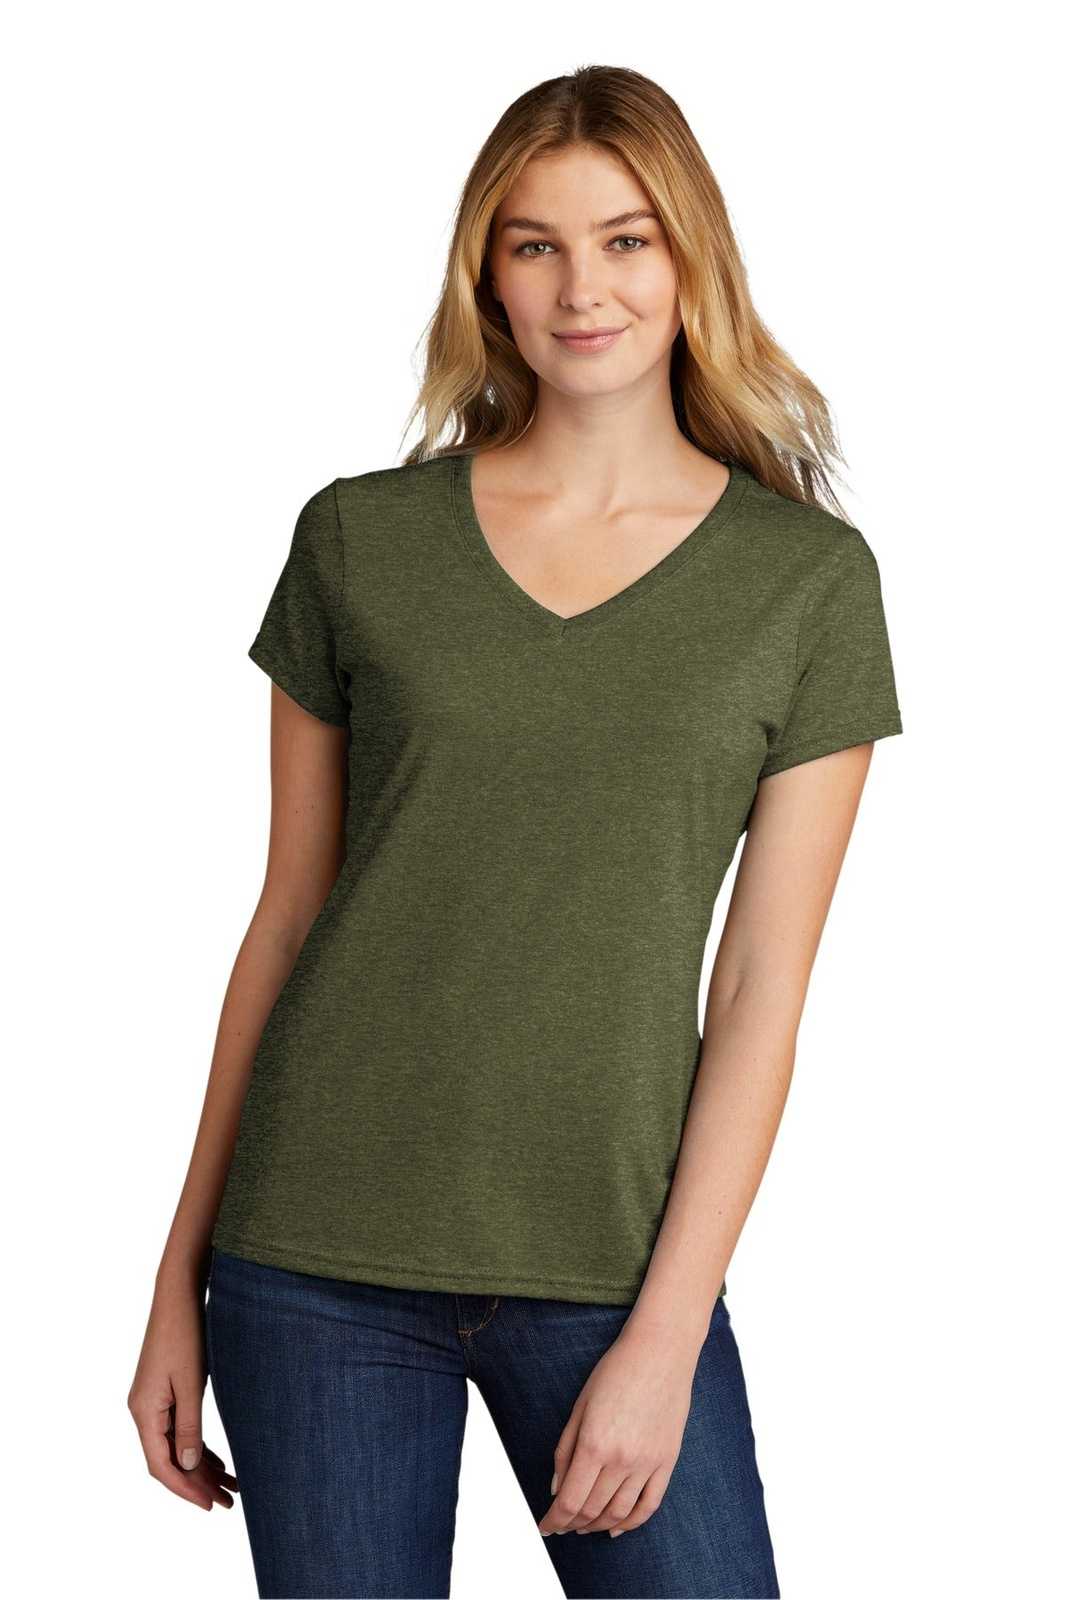 Port & Company LPC330V Ladies Tri-Blend V-Neck Tee - Military Green Heather - HIT a Double - 1